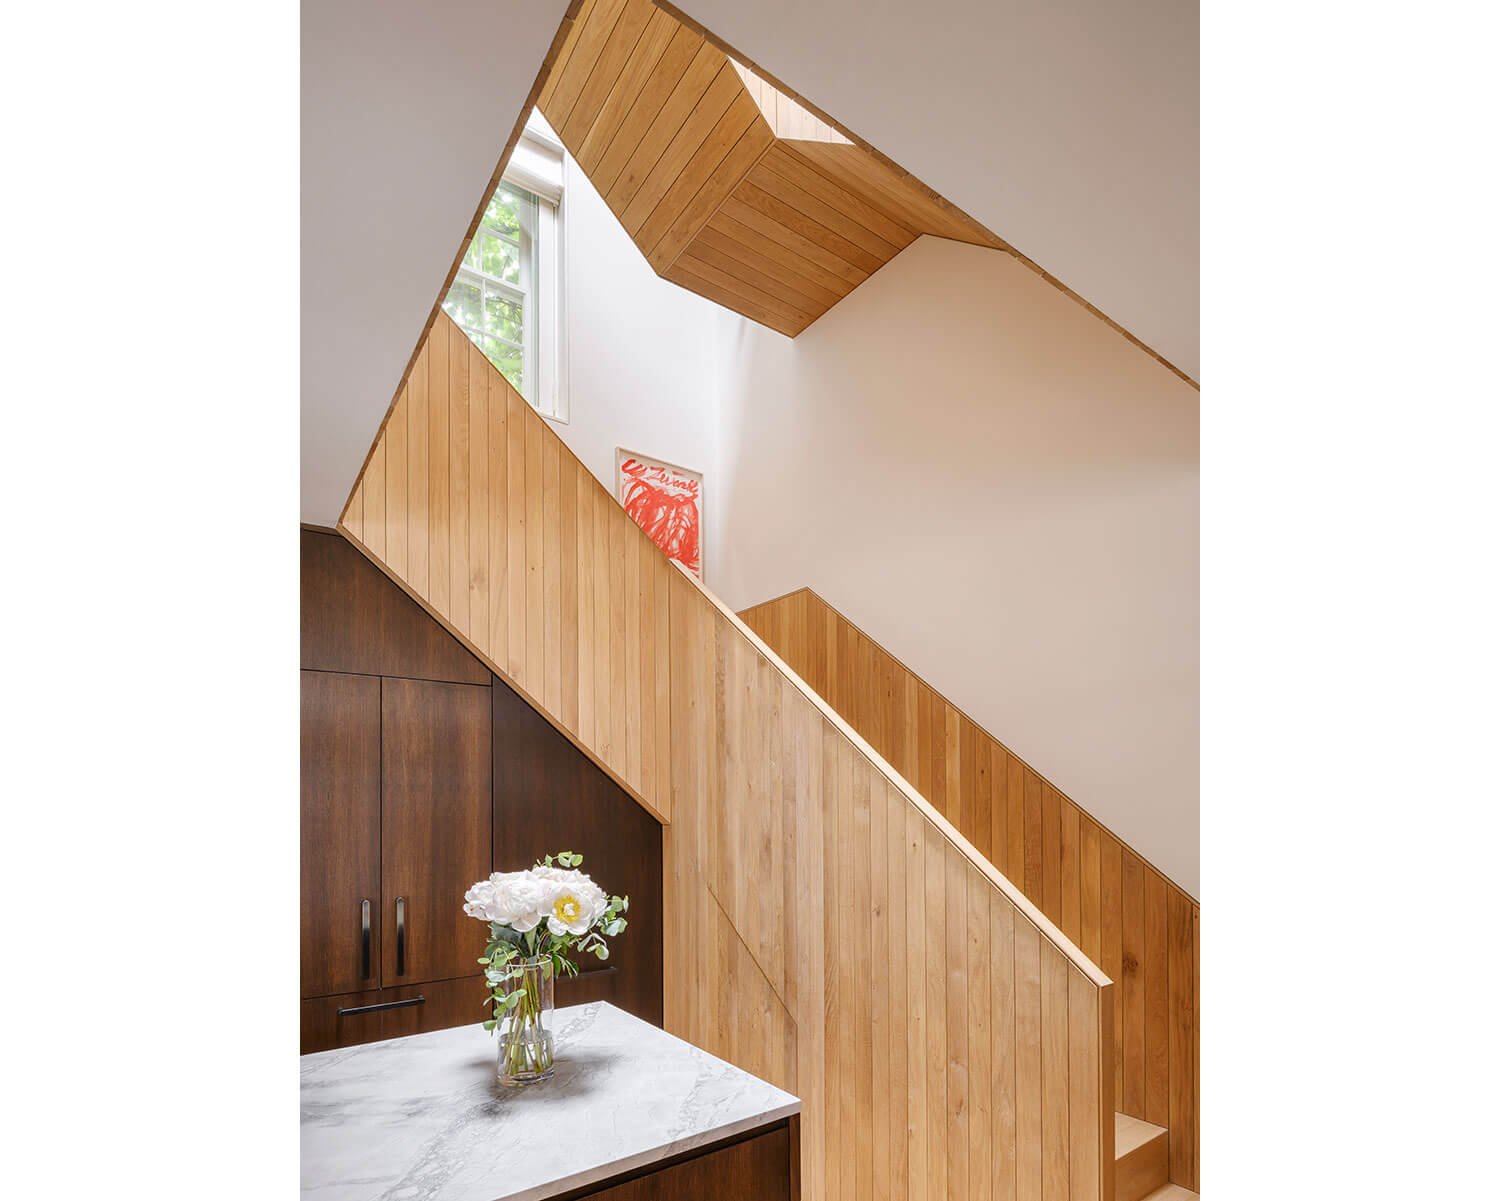 notting-hill-mews-house-retrofit-enerphit-architects-Staircase-1.jpg